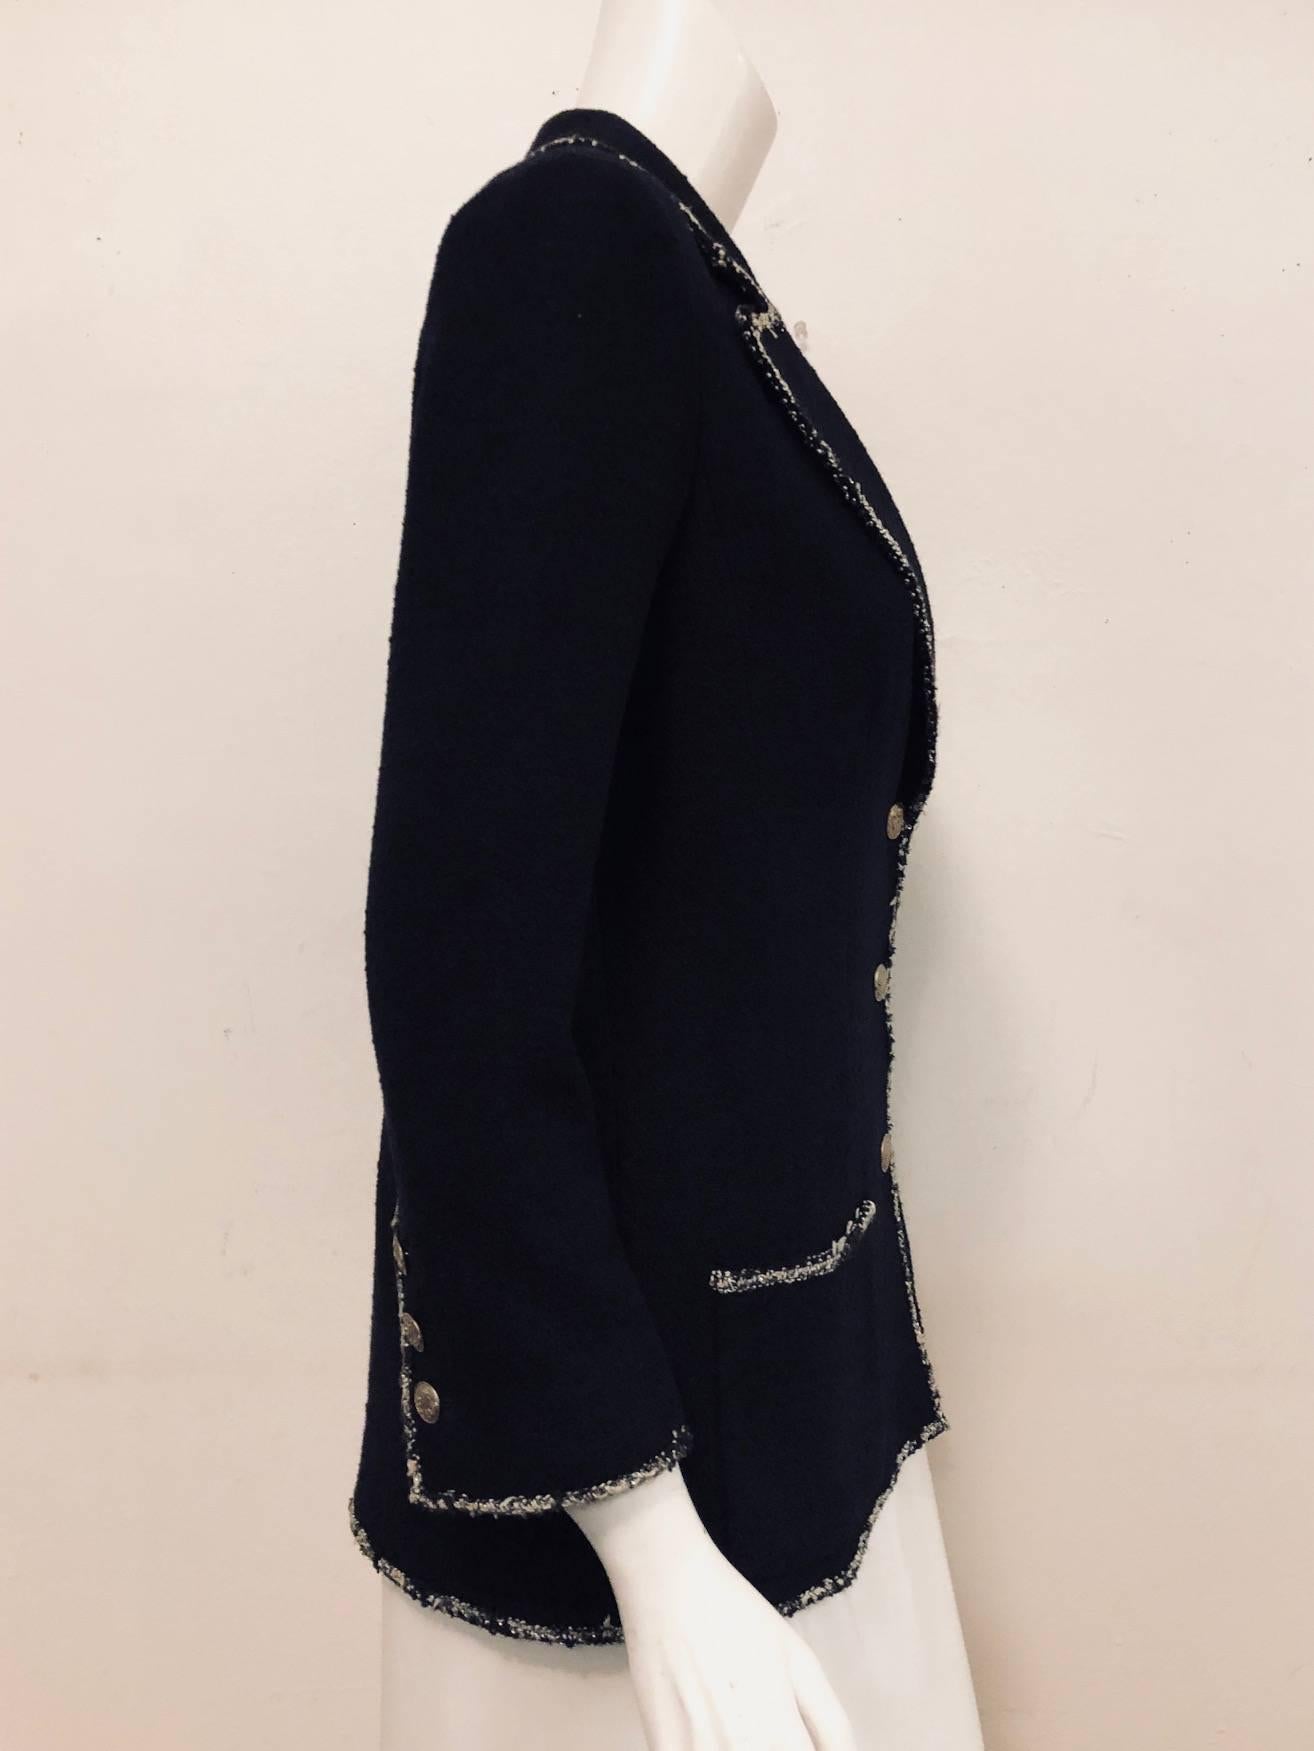 Black Chanel Navy Wool Boucle Fitted Jacket With Iconic No. 5 Coat of Arms on Pocket